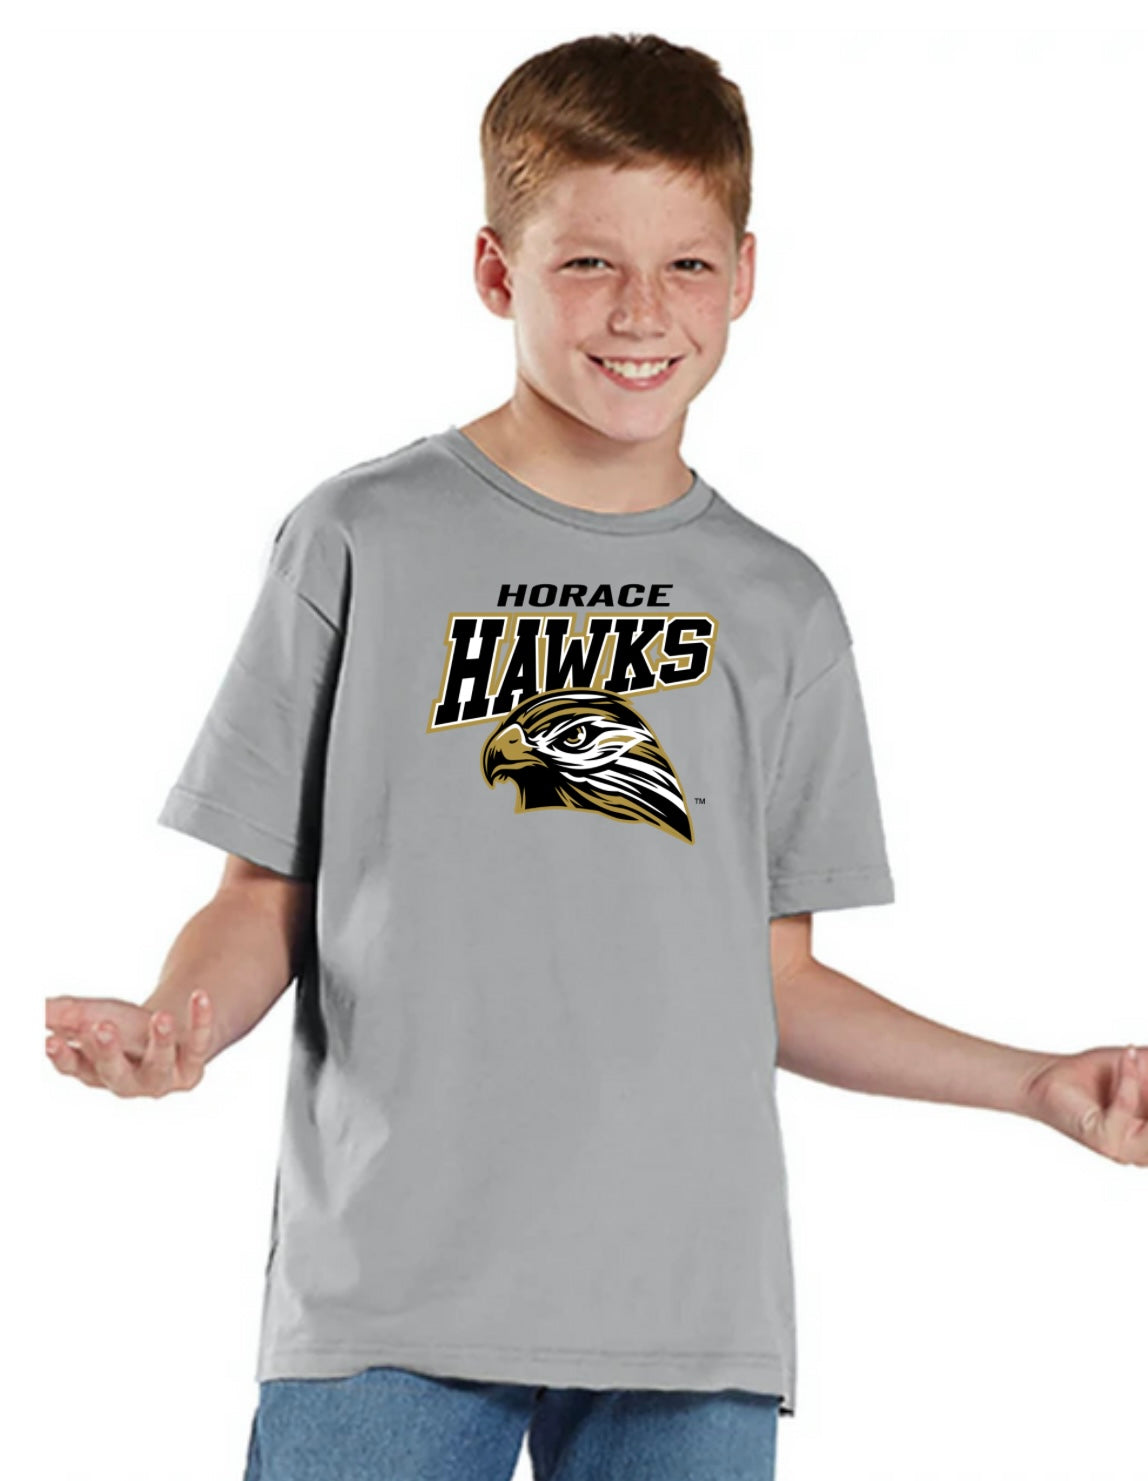 Horace Hawks Youth Dry Fit Tee